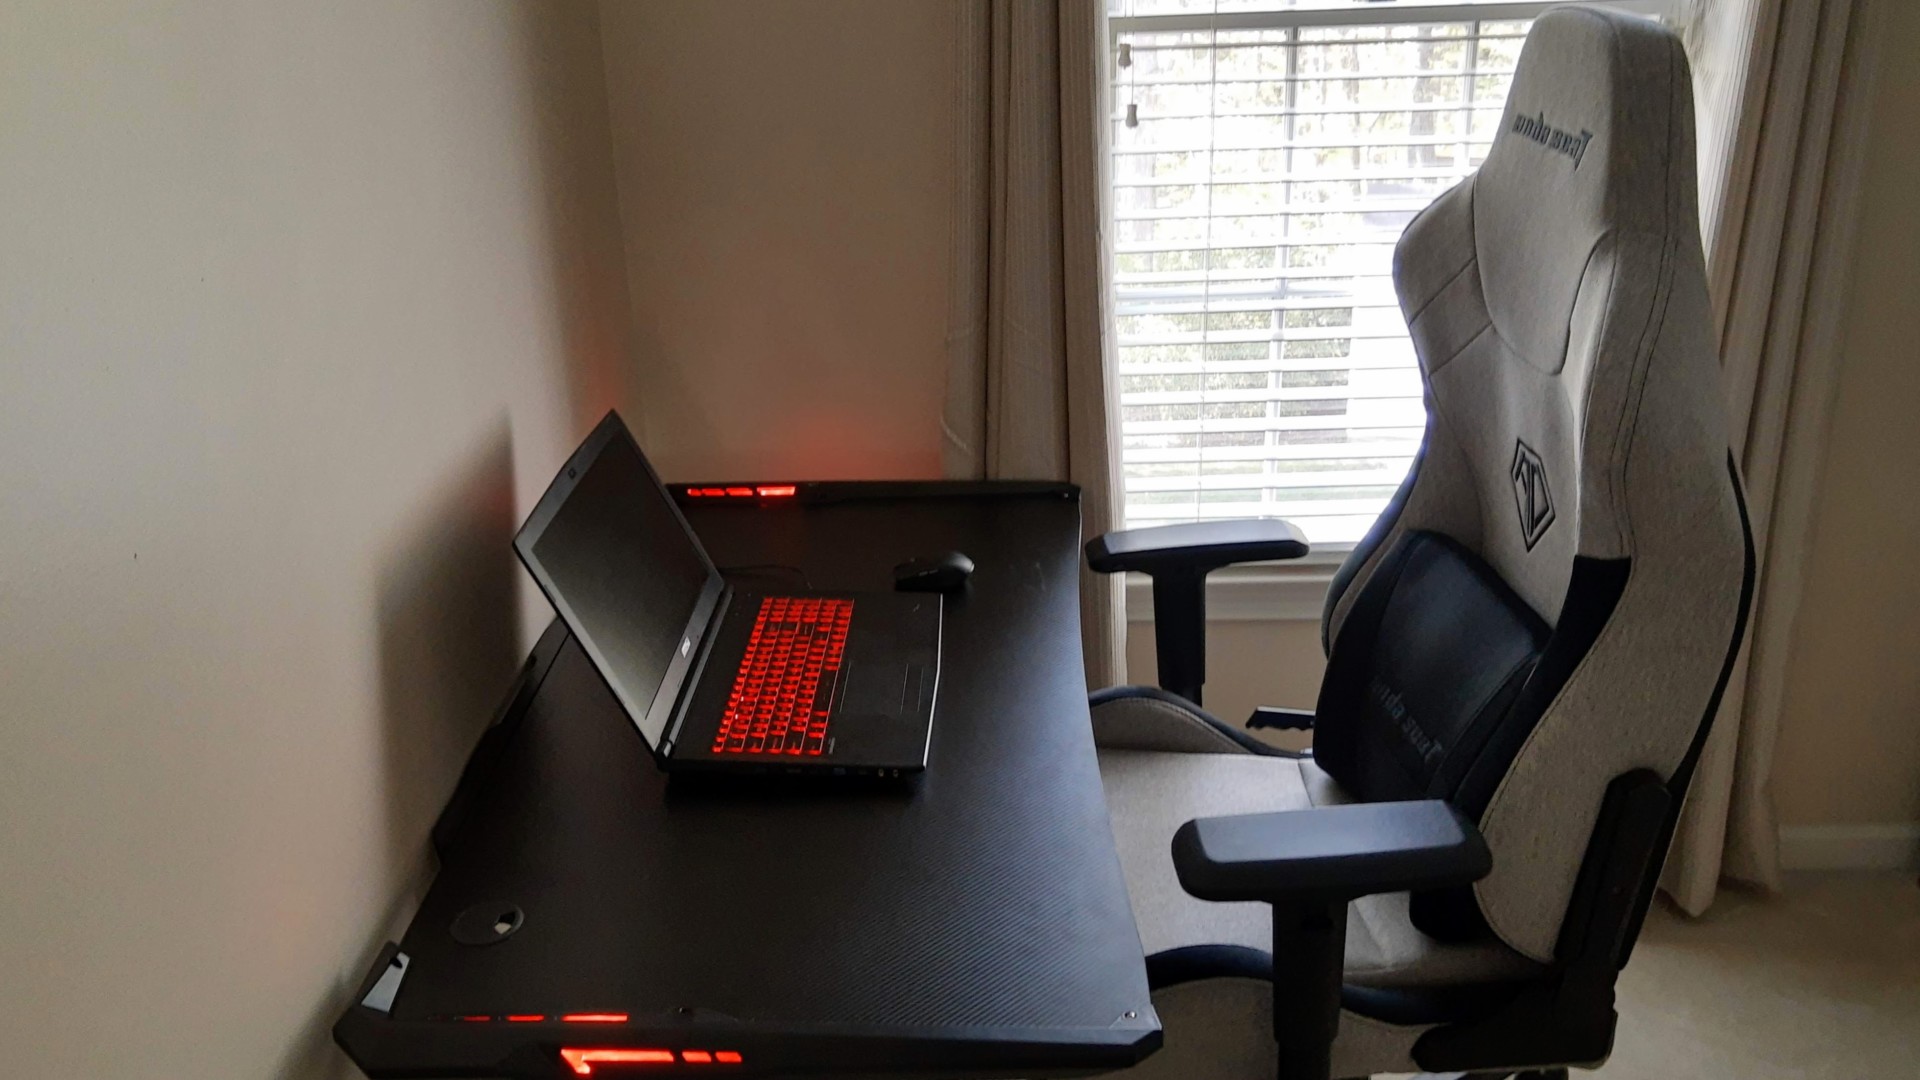 Gaming Chair And Desk